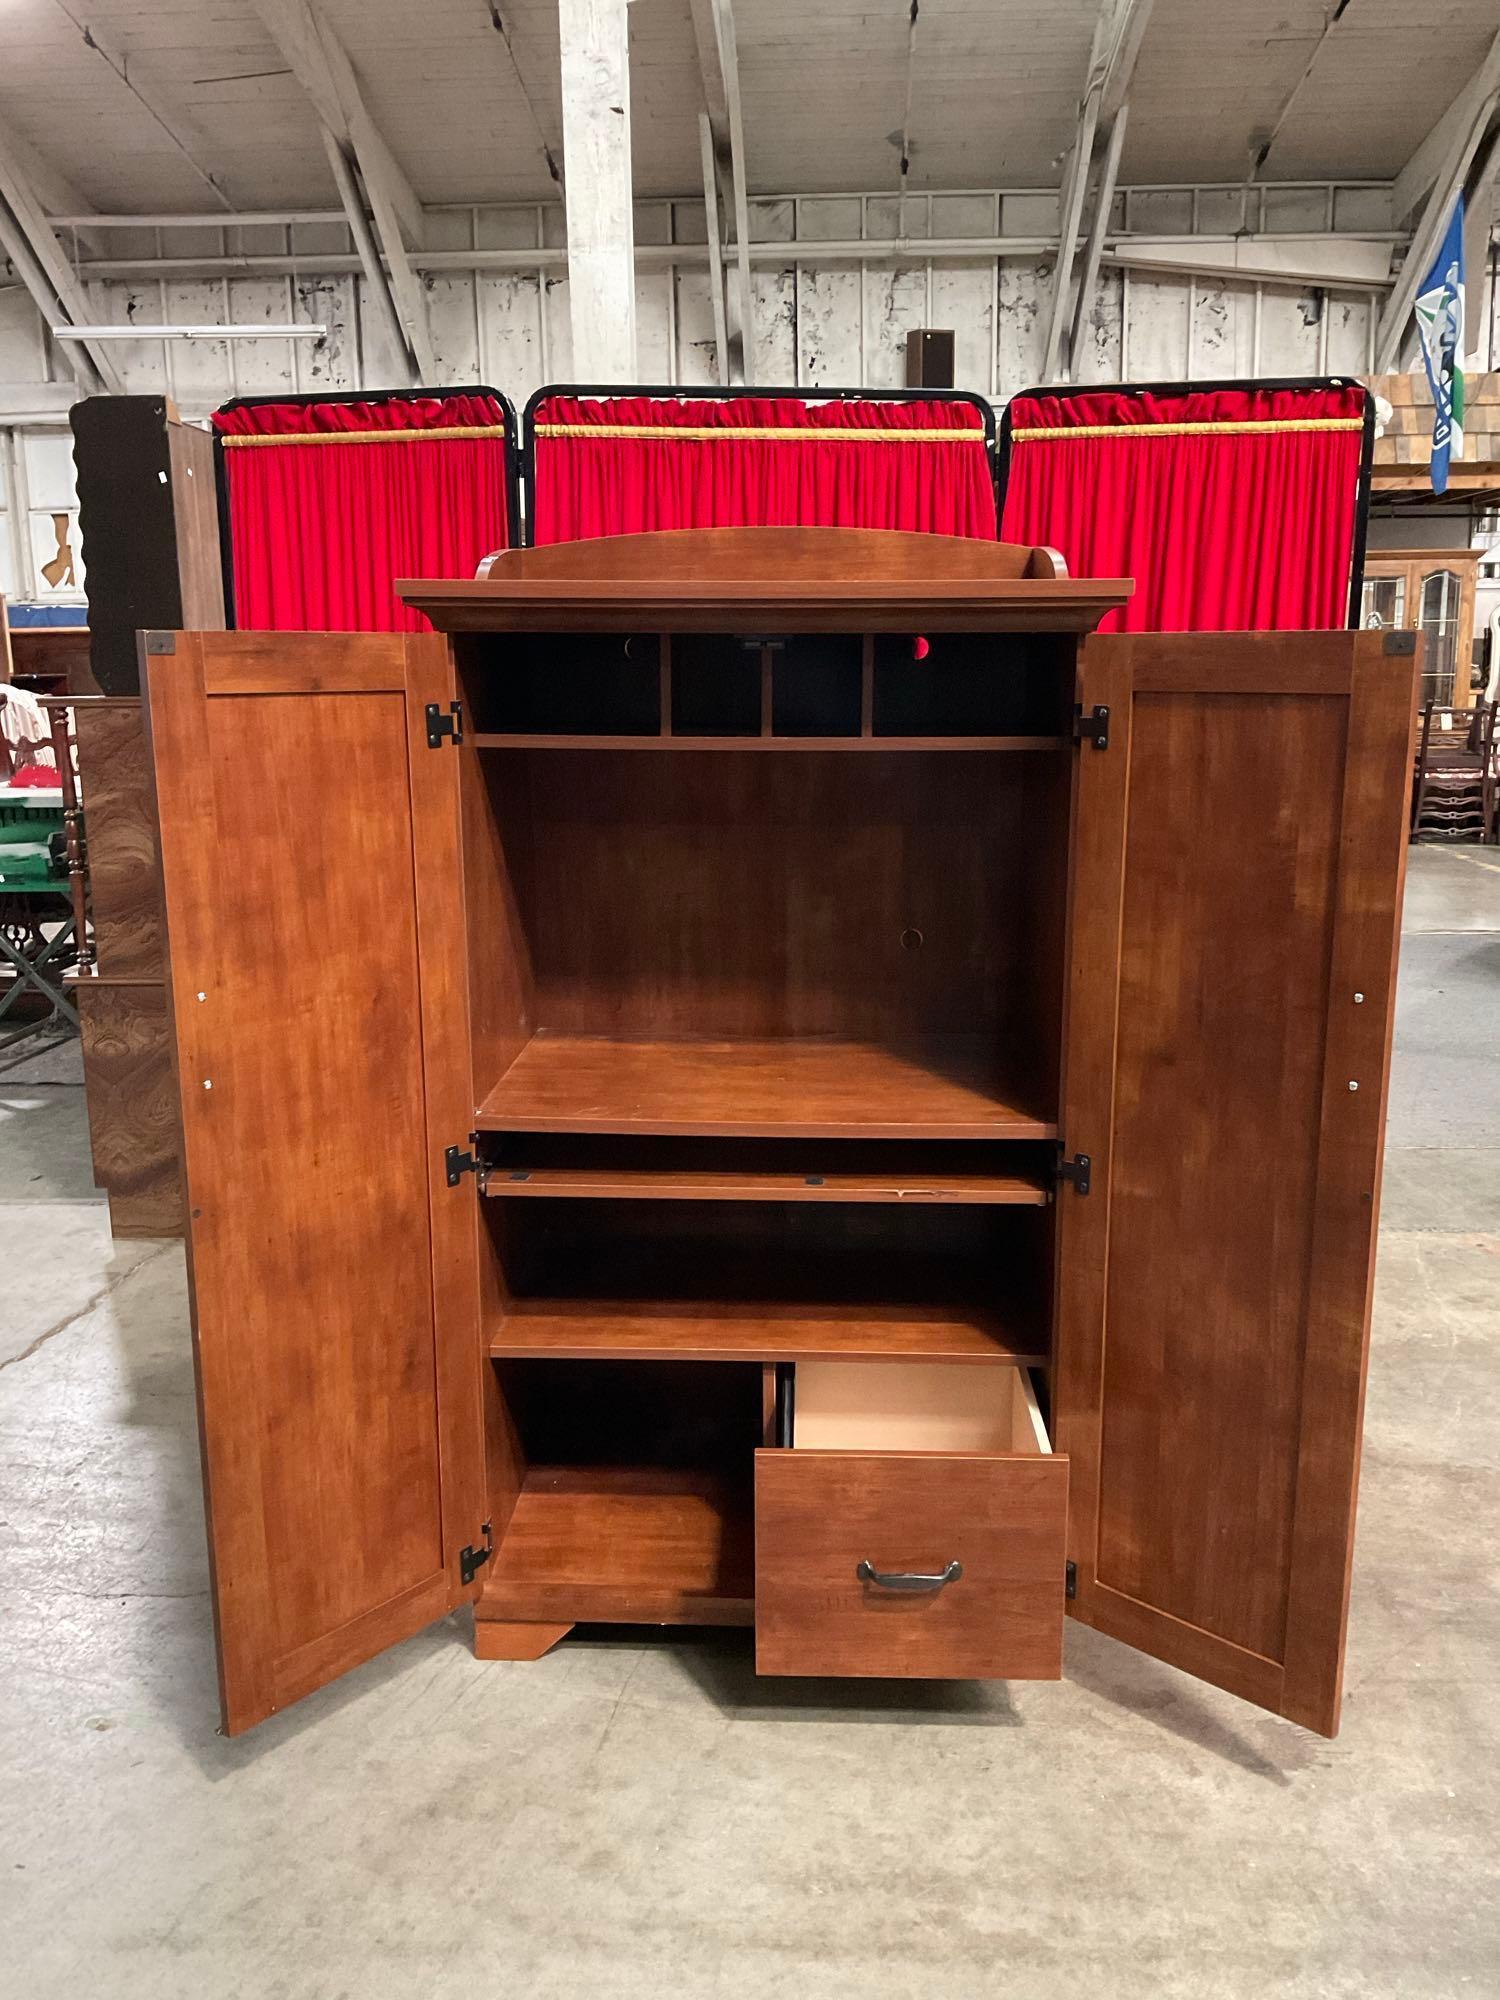 Modern Sauder Wooden Media Cabinet w/ Pull Out Shelf, 6 Compartments & 1 Drawer. See pics.